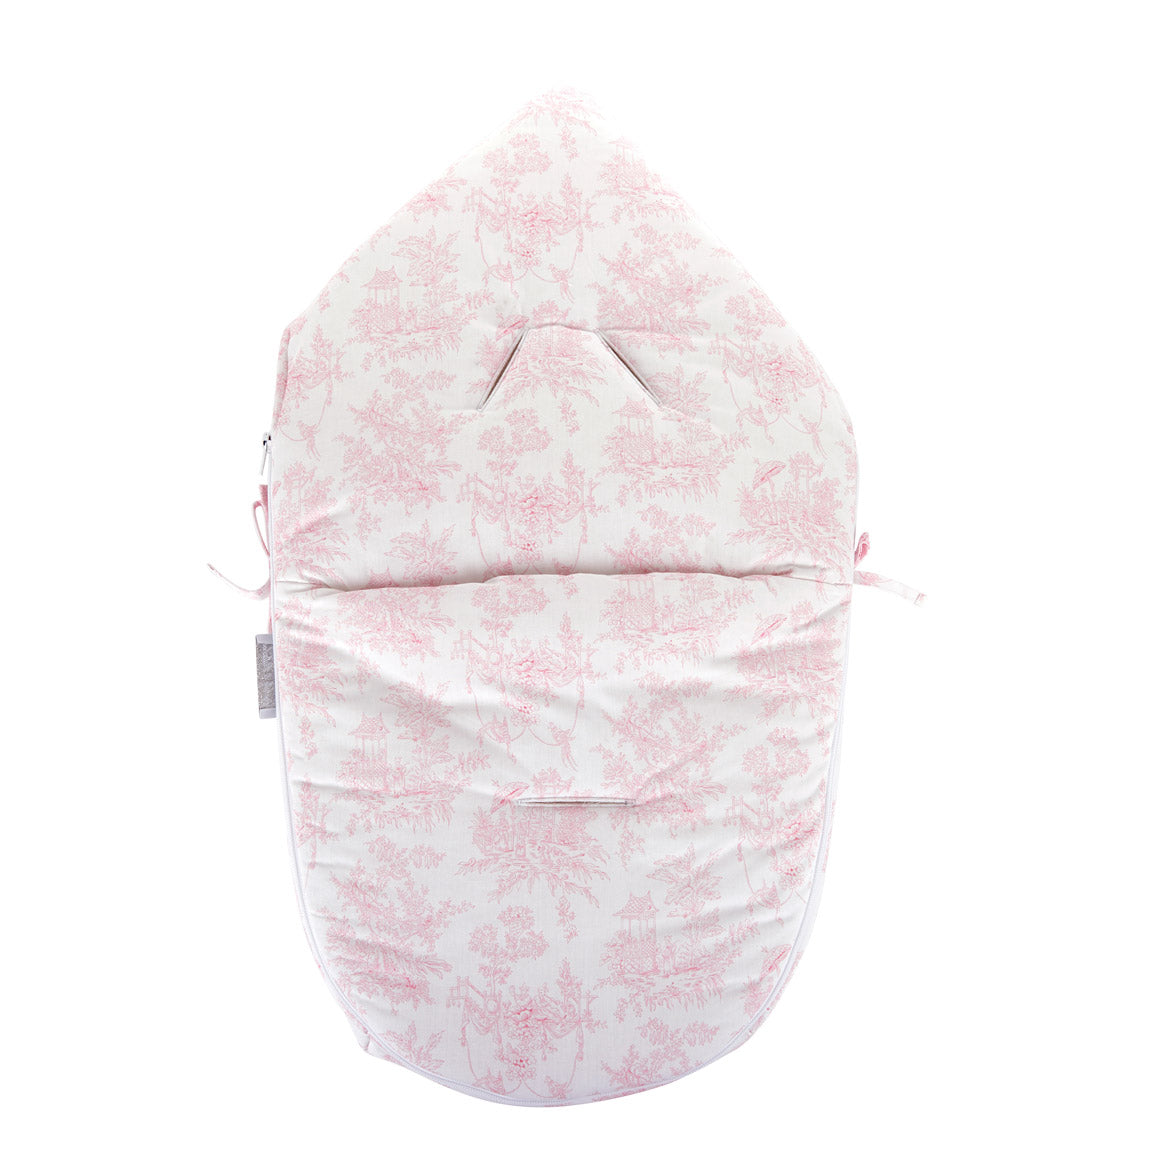 Theophile & Patachou Hooded Sleeping Bag for Car Seat “Pebble” - Sweet Pink